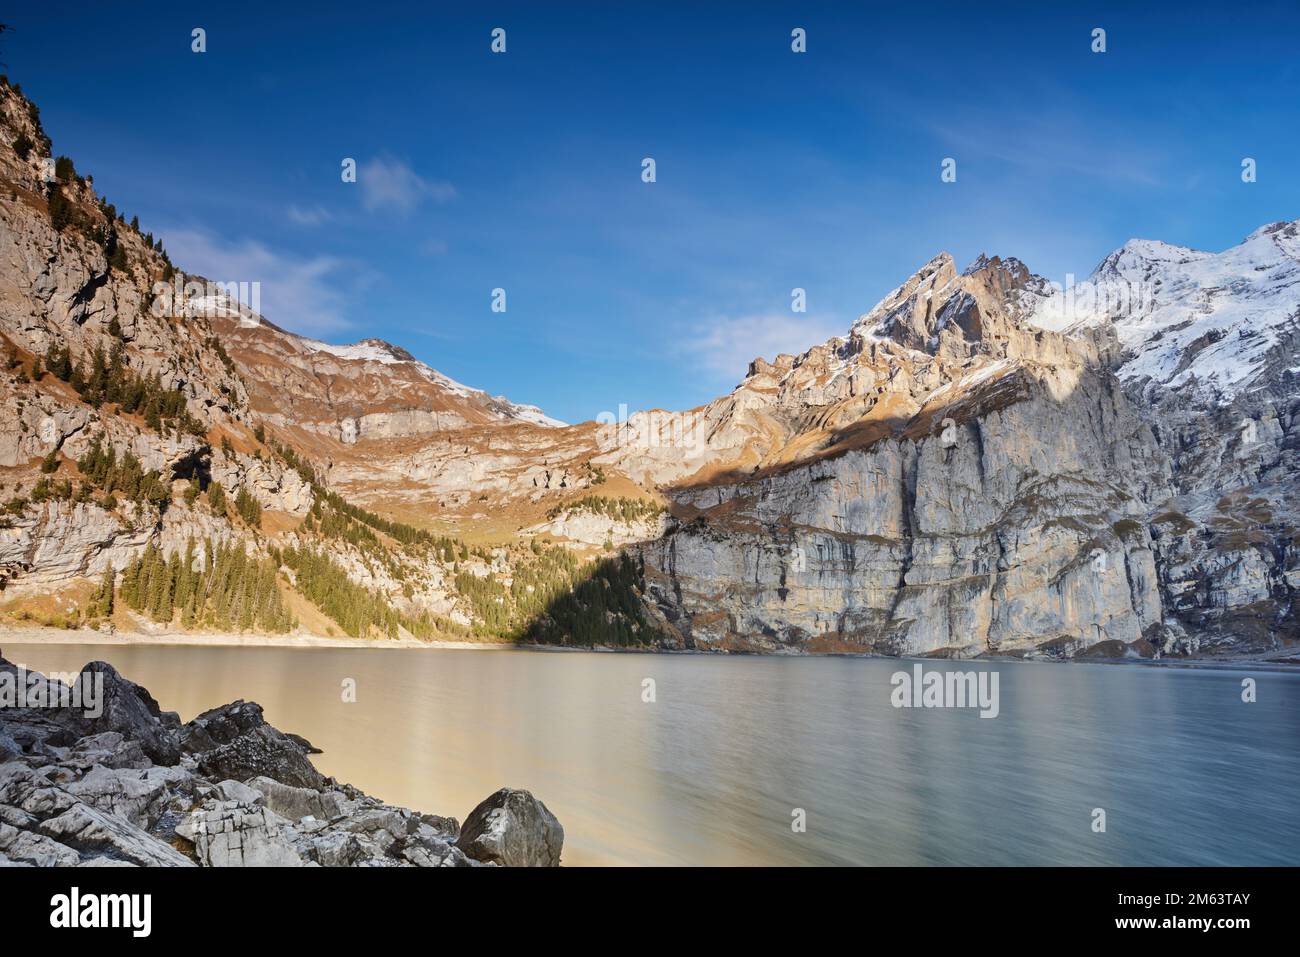 Amazing blue lake with large mountain in Schweiz Stock Photo